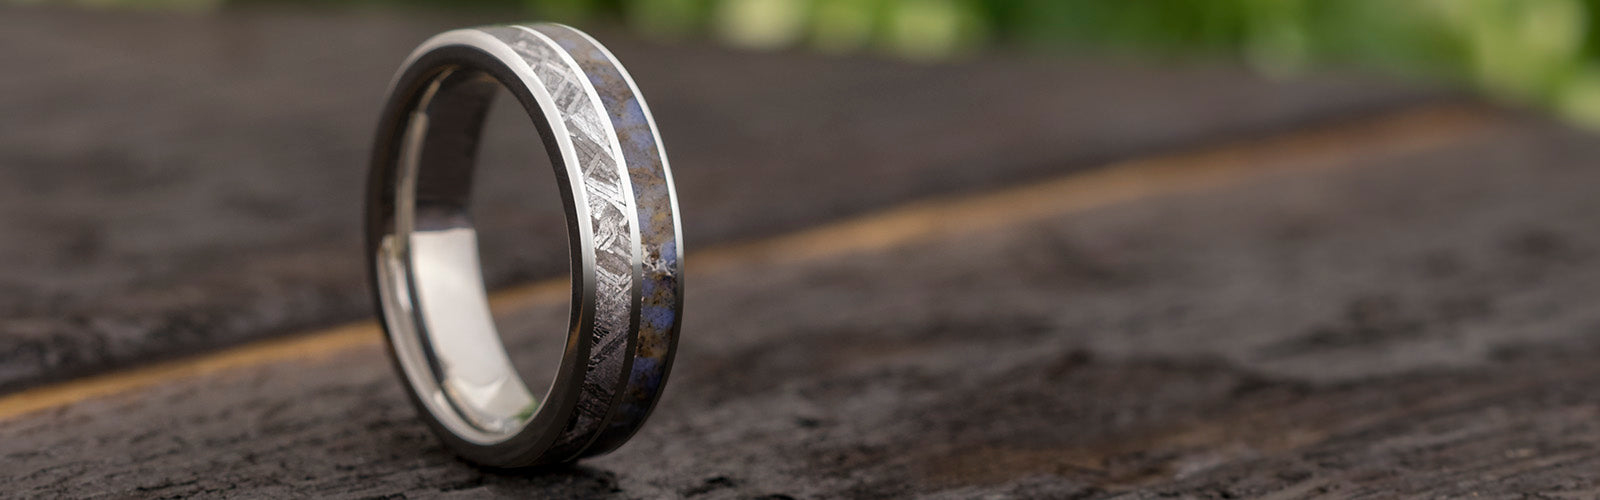 Wedding Bands With Two Inlays from Jewelry by Johan